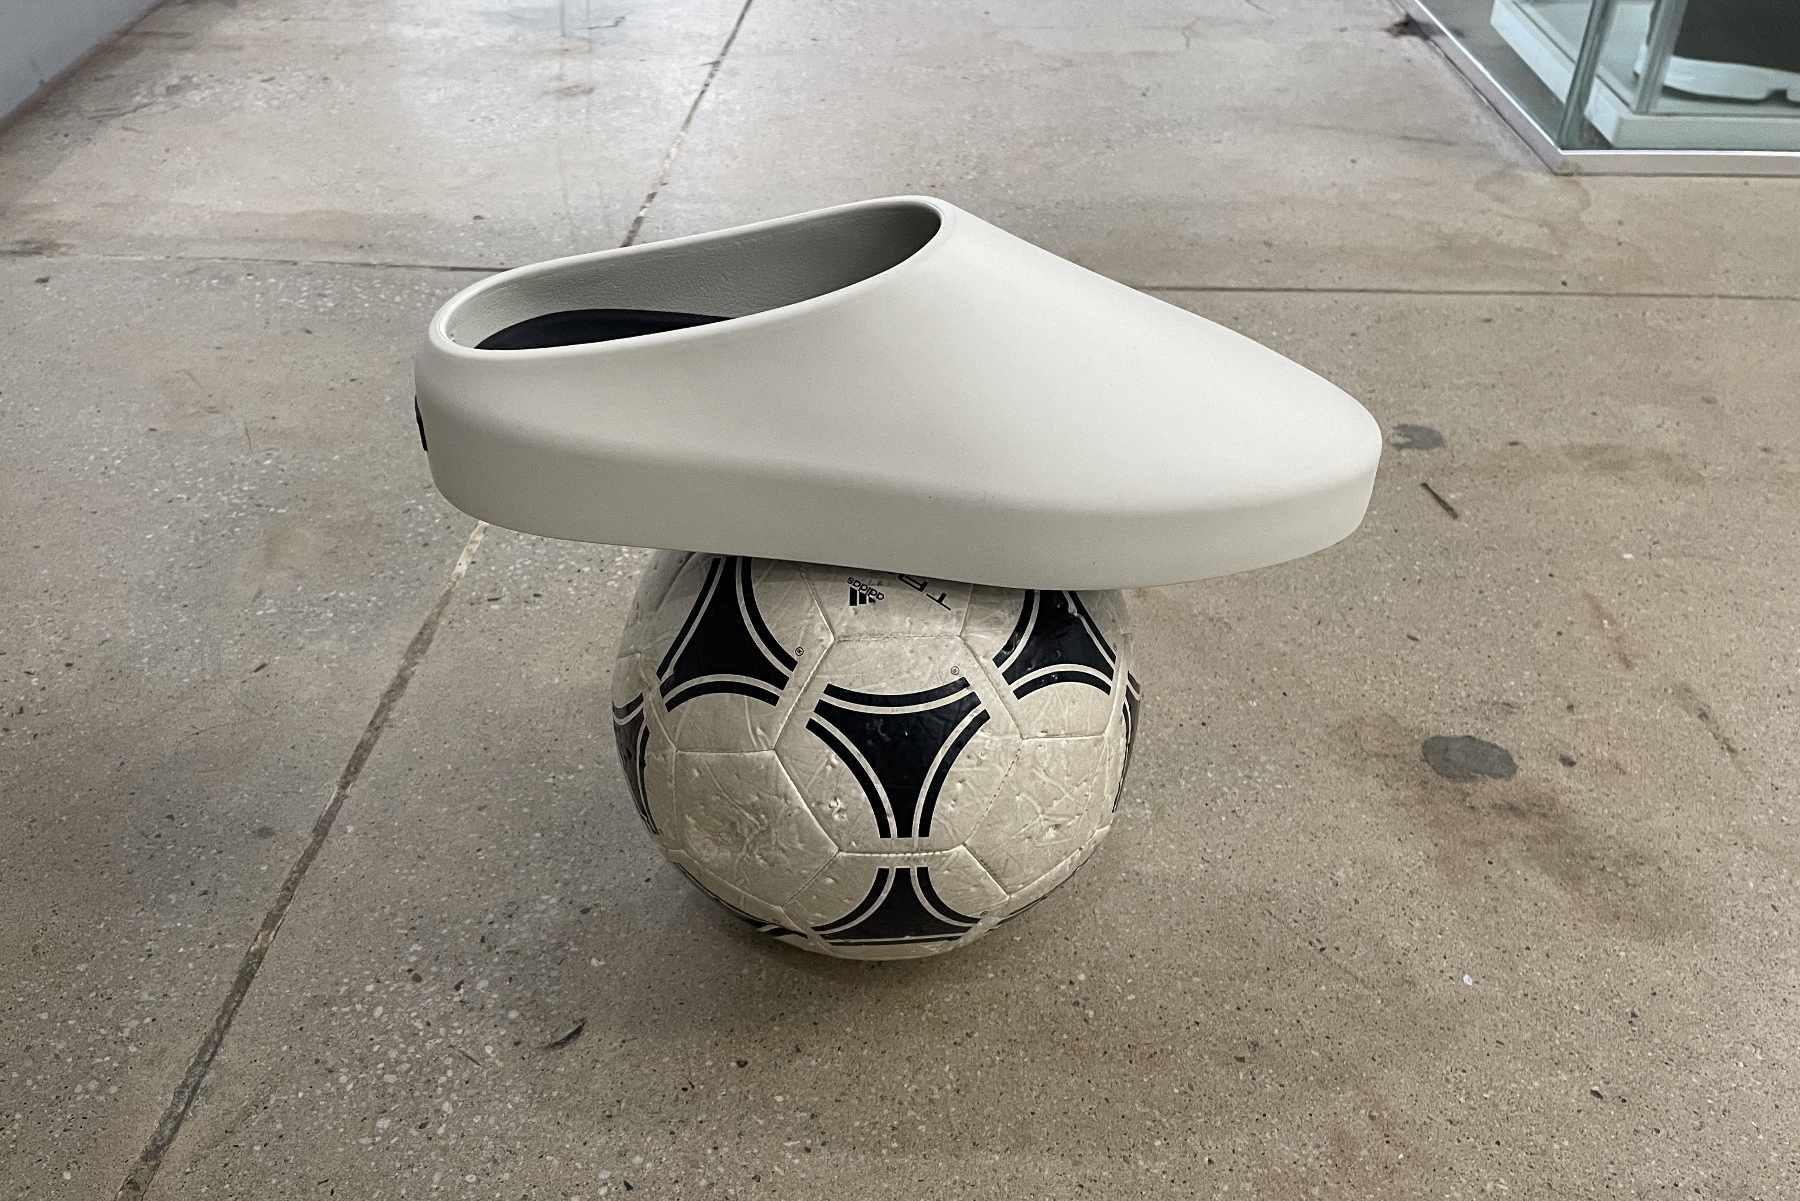 Fear of God's California 2.0 slip-on shoe in cream balancing on a soccerball